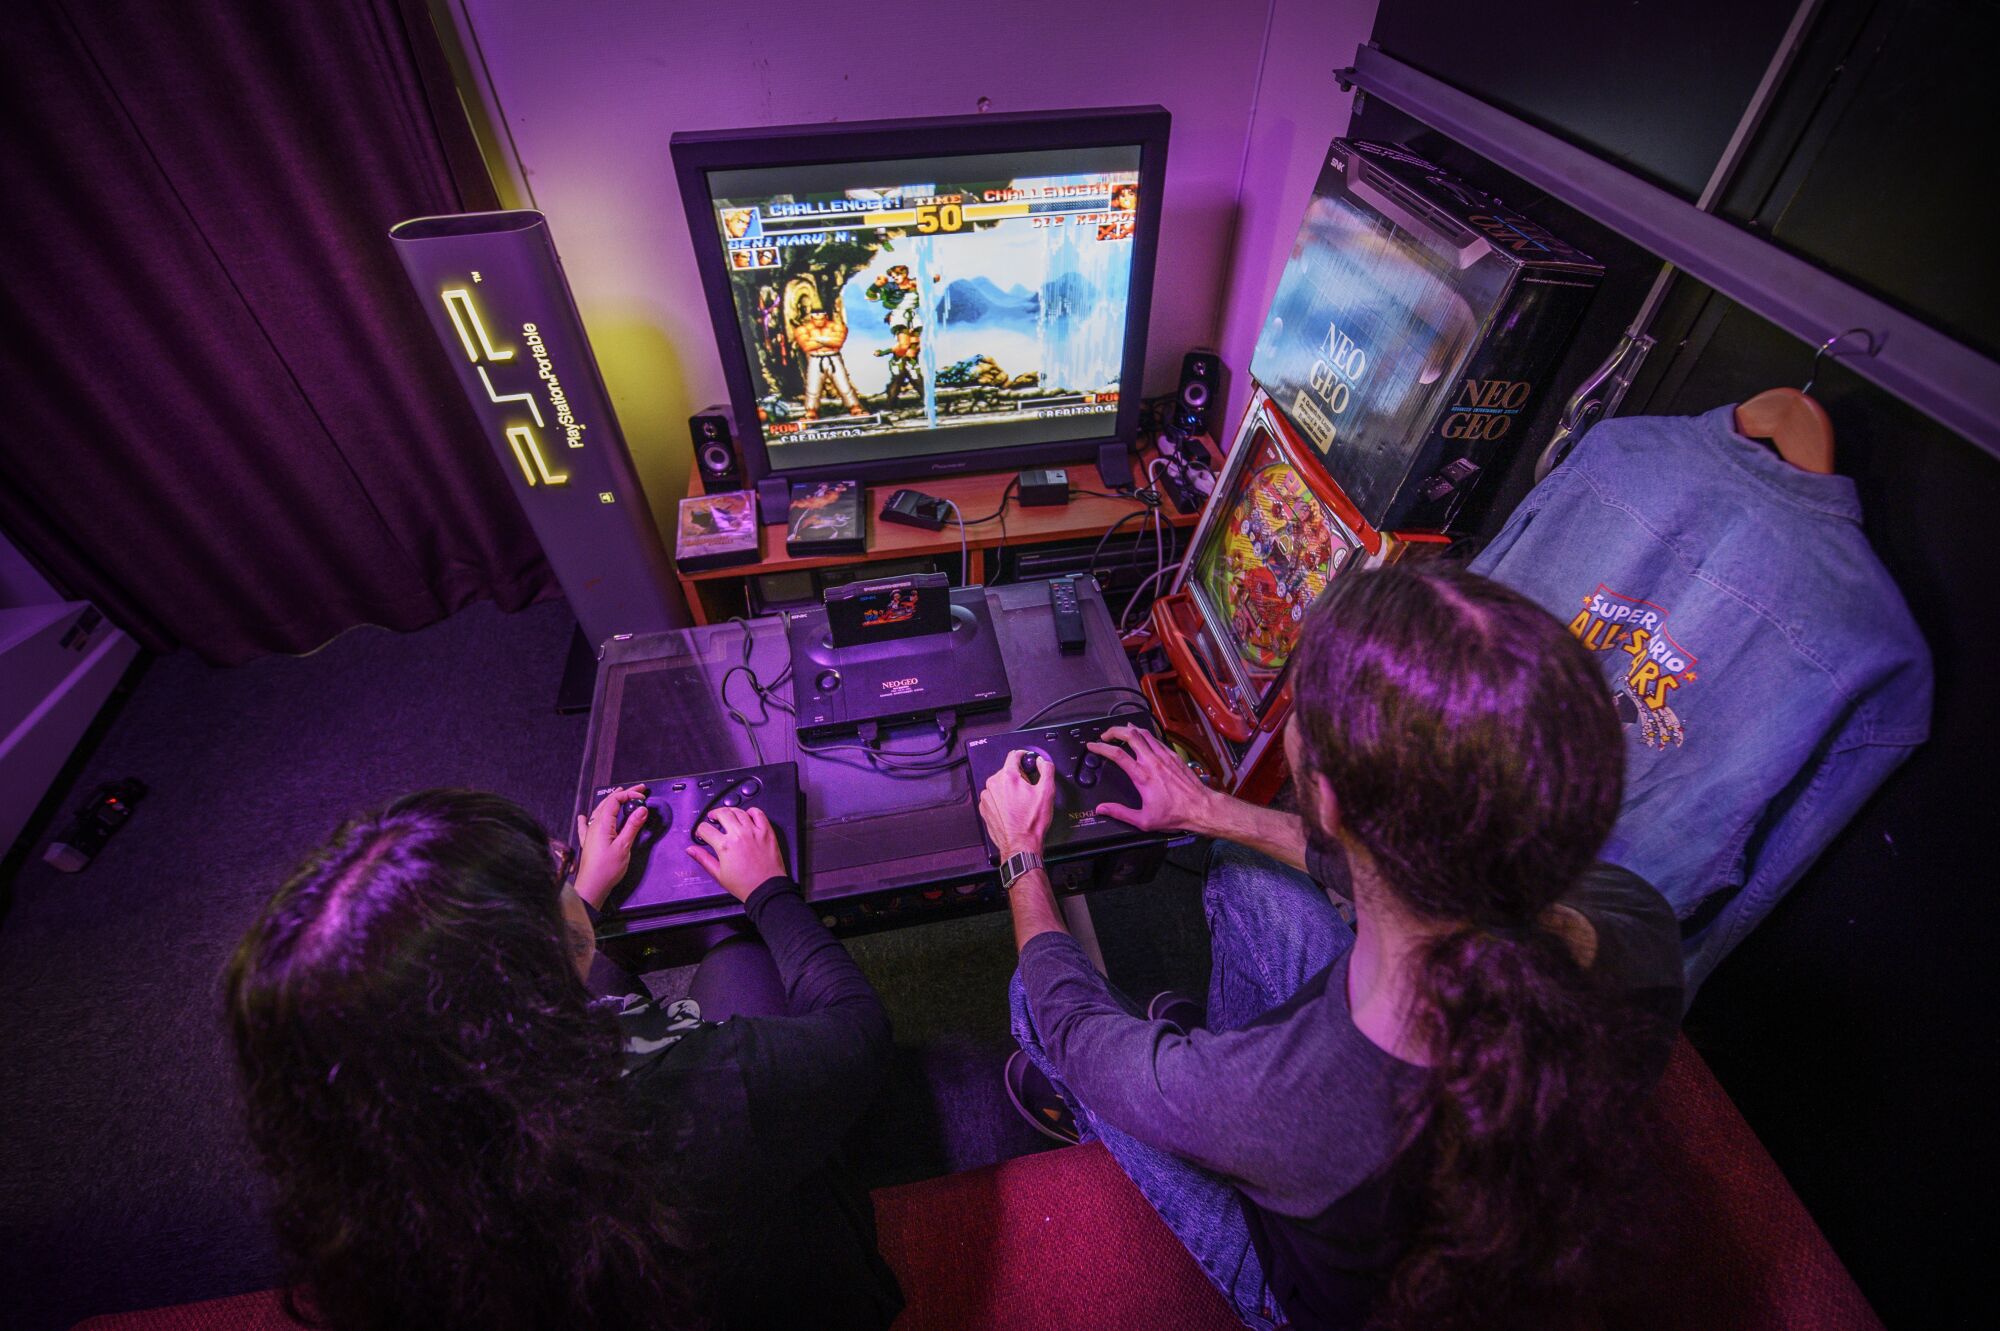 A view from above of two people playing a video game in a room